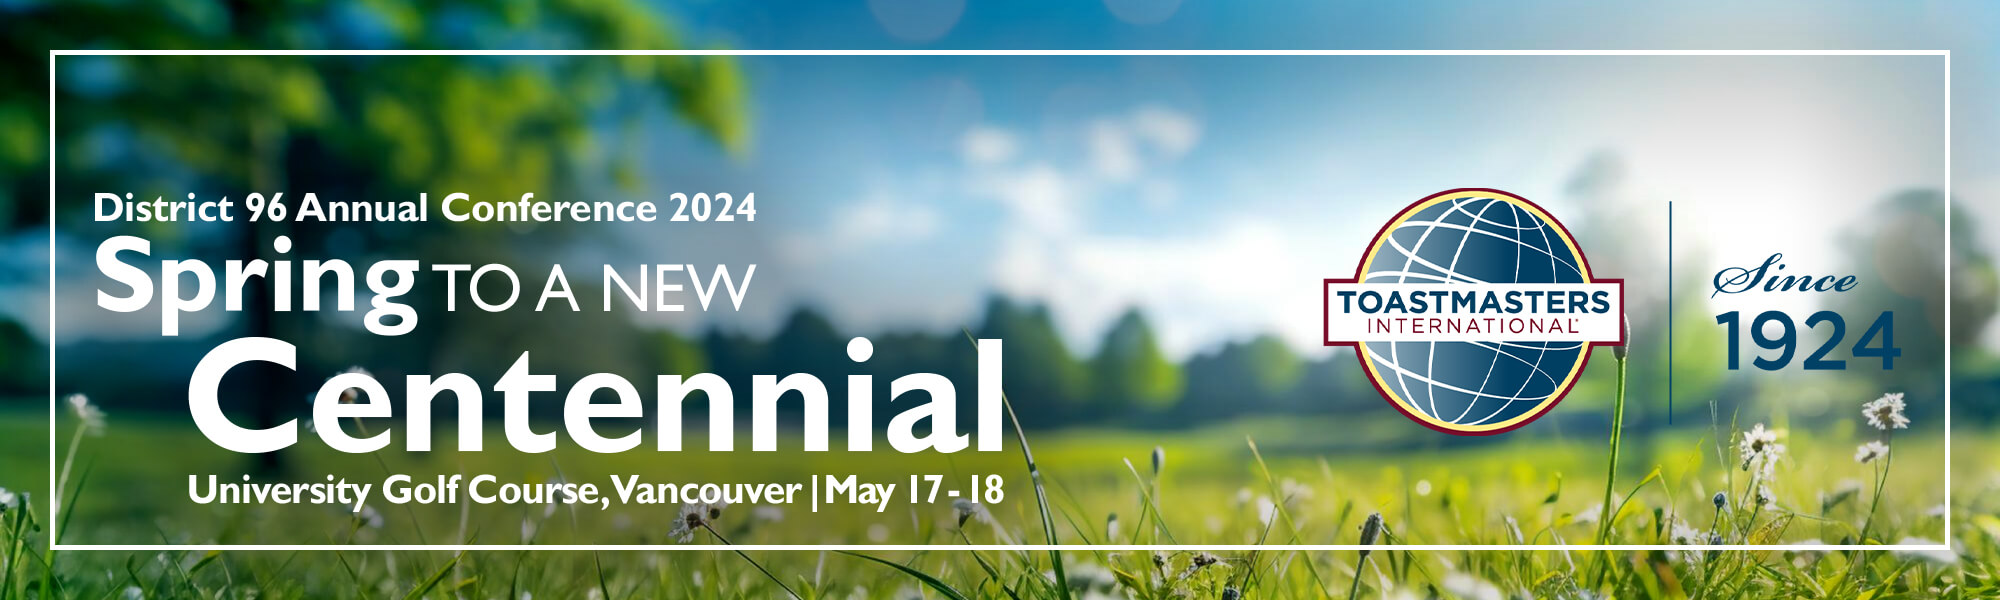 Conference theme "Spring to a new Centennial" over the image of a field full of green grass.